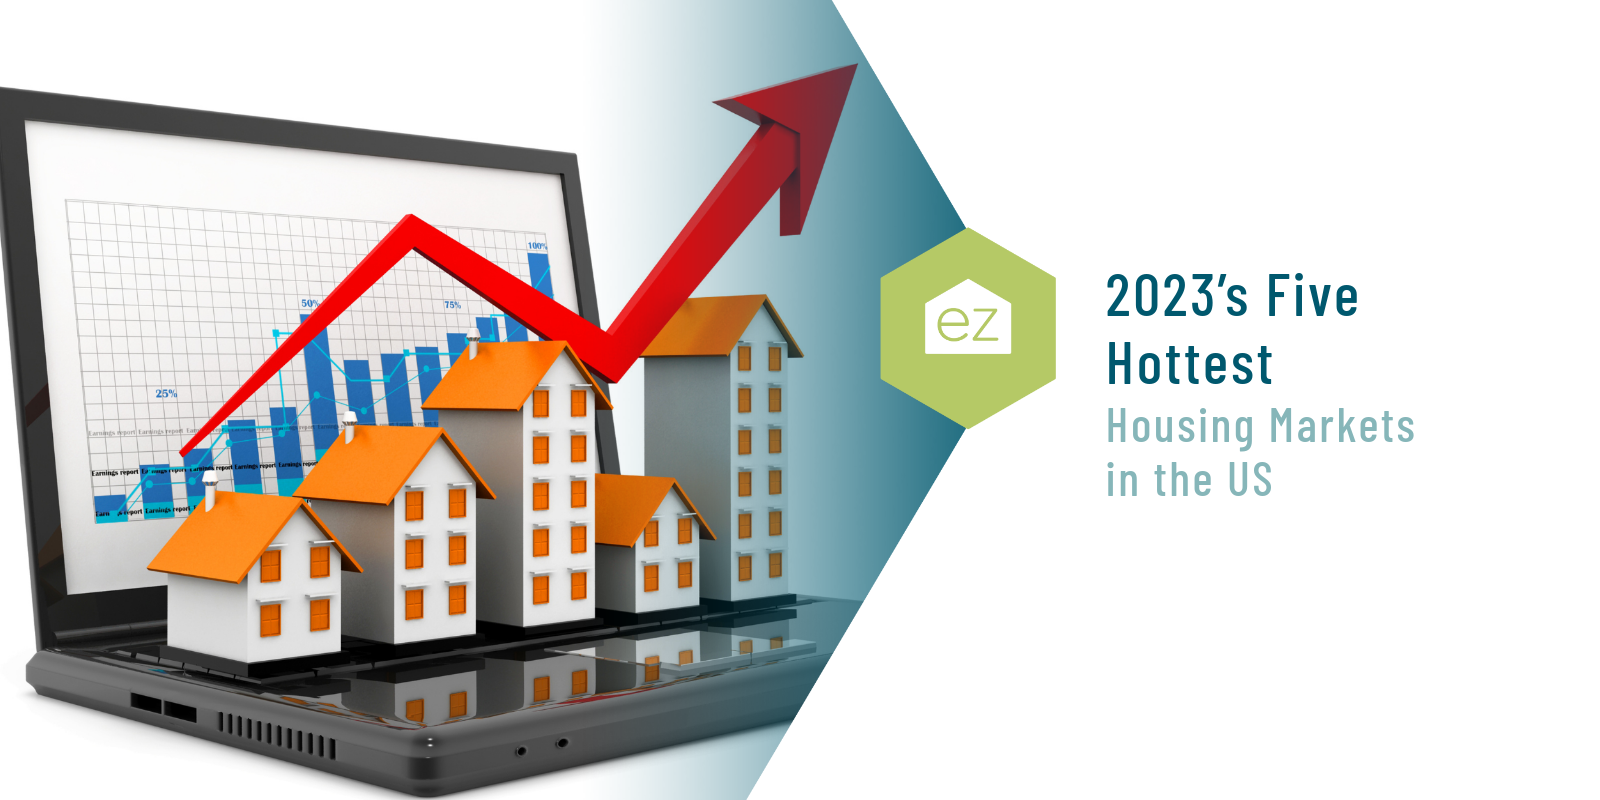 Hottest Housing Markets in US 2023